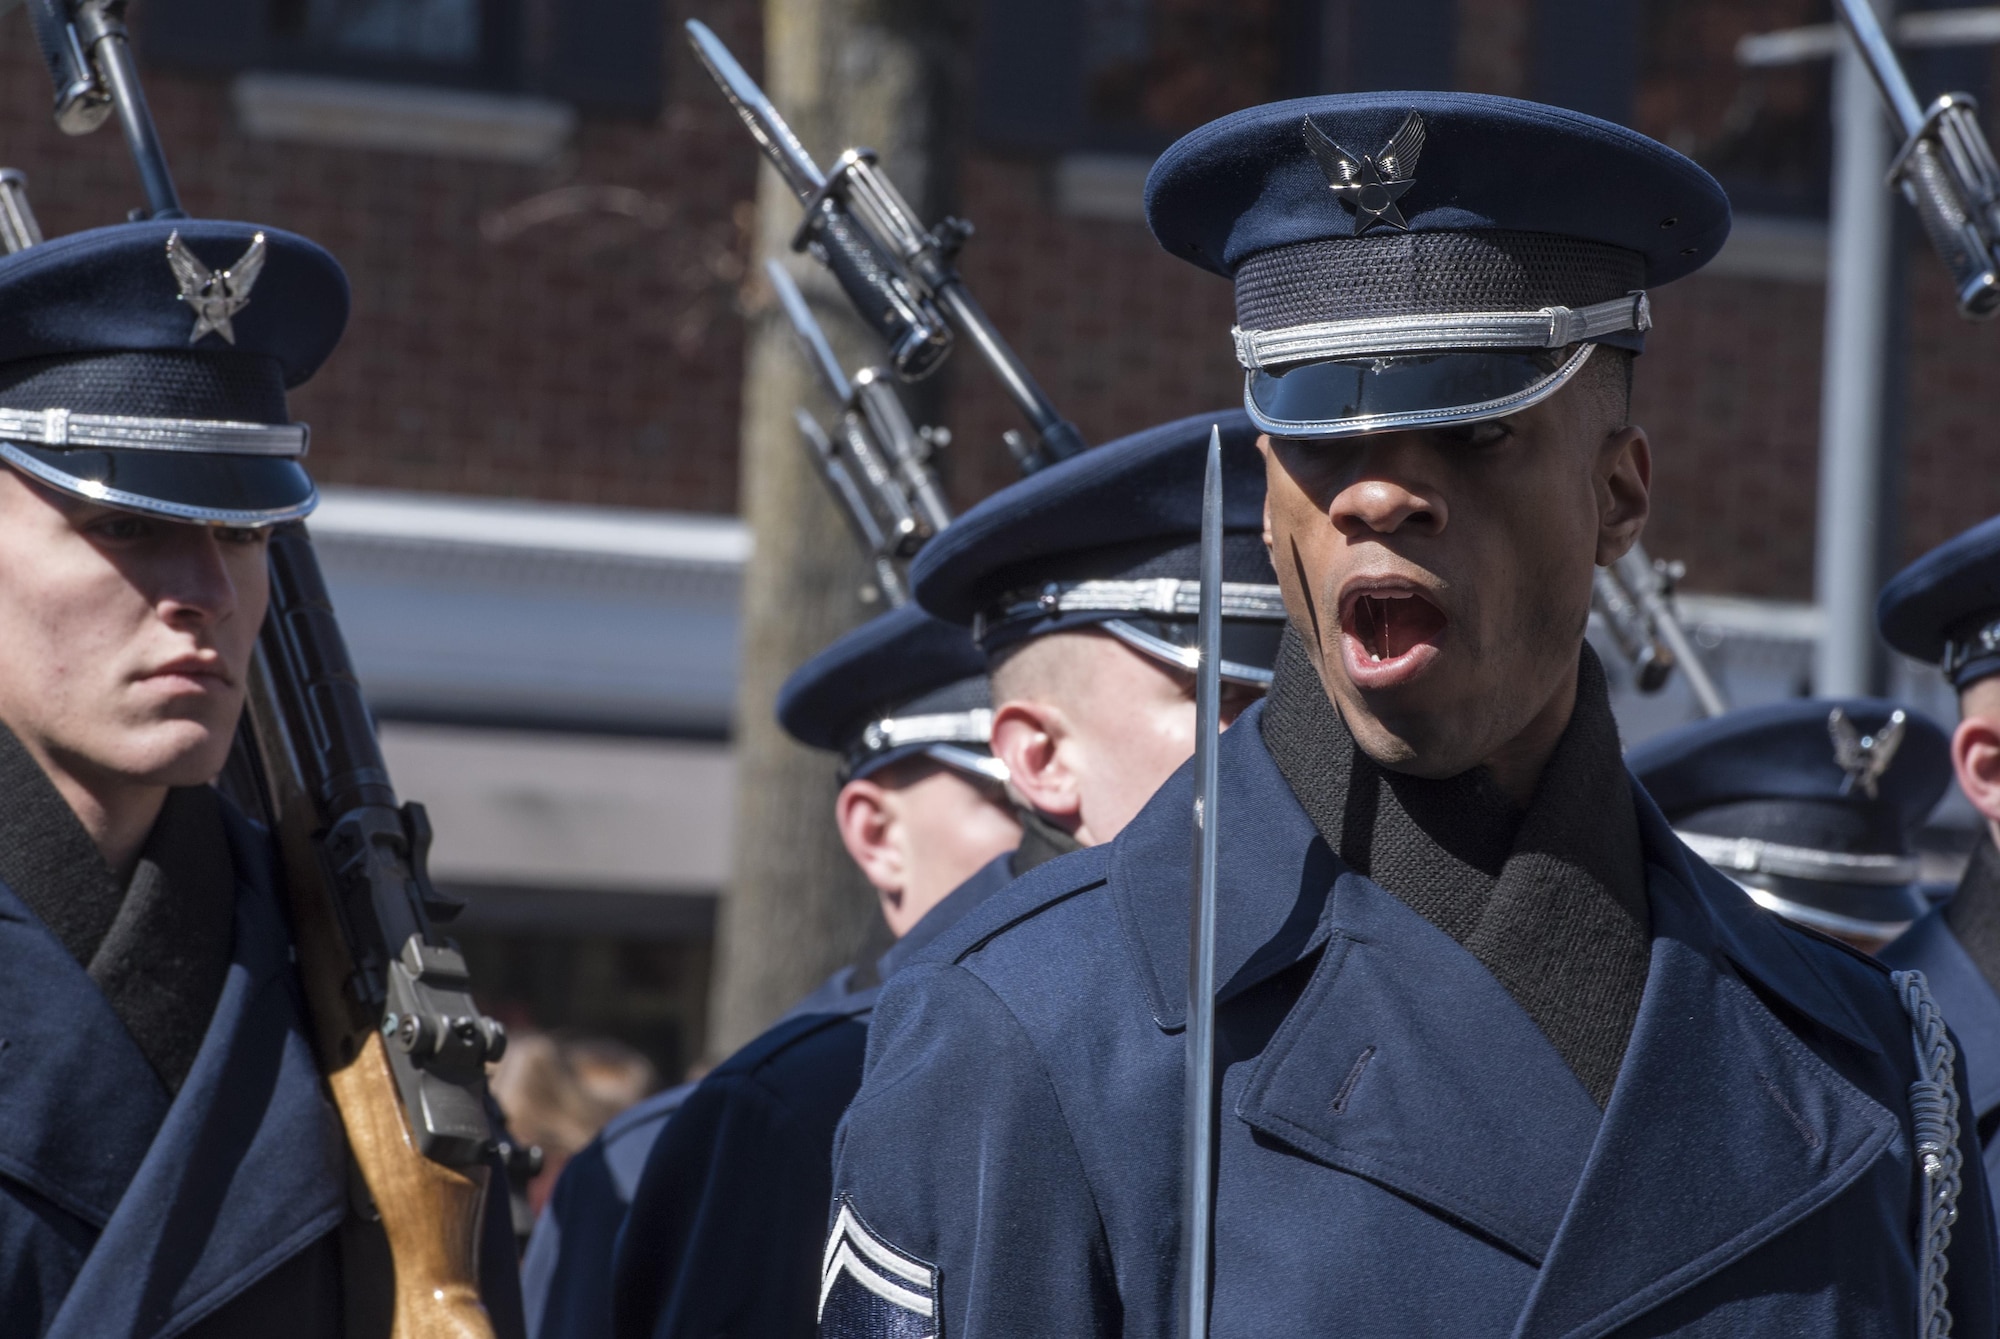 Senior Master Sgt. Robert Jones, U.S. Air Force Honor Guard operations superintendent, shouts a command during the 2017 Saint Patrick’s Day Parade in Alexandria, Va., March 4, 2017. In order to precisely follow these commands, ceremonial guardsmen go through an eight-week training program that teaches drill, discipline and standards. (U.S. Air Force photo by Senior Airman Jordyn Fetter)